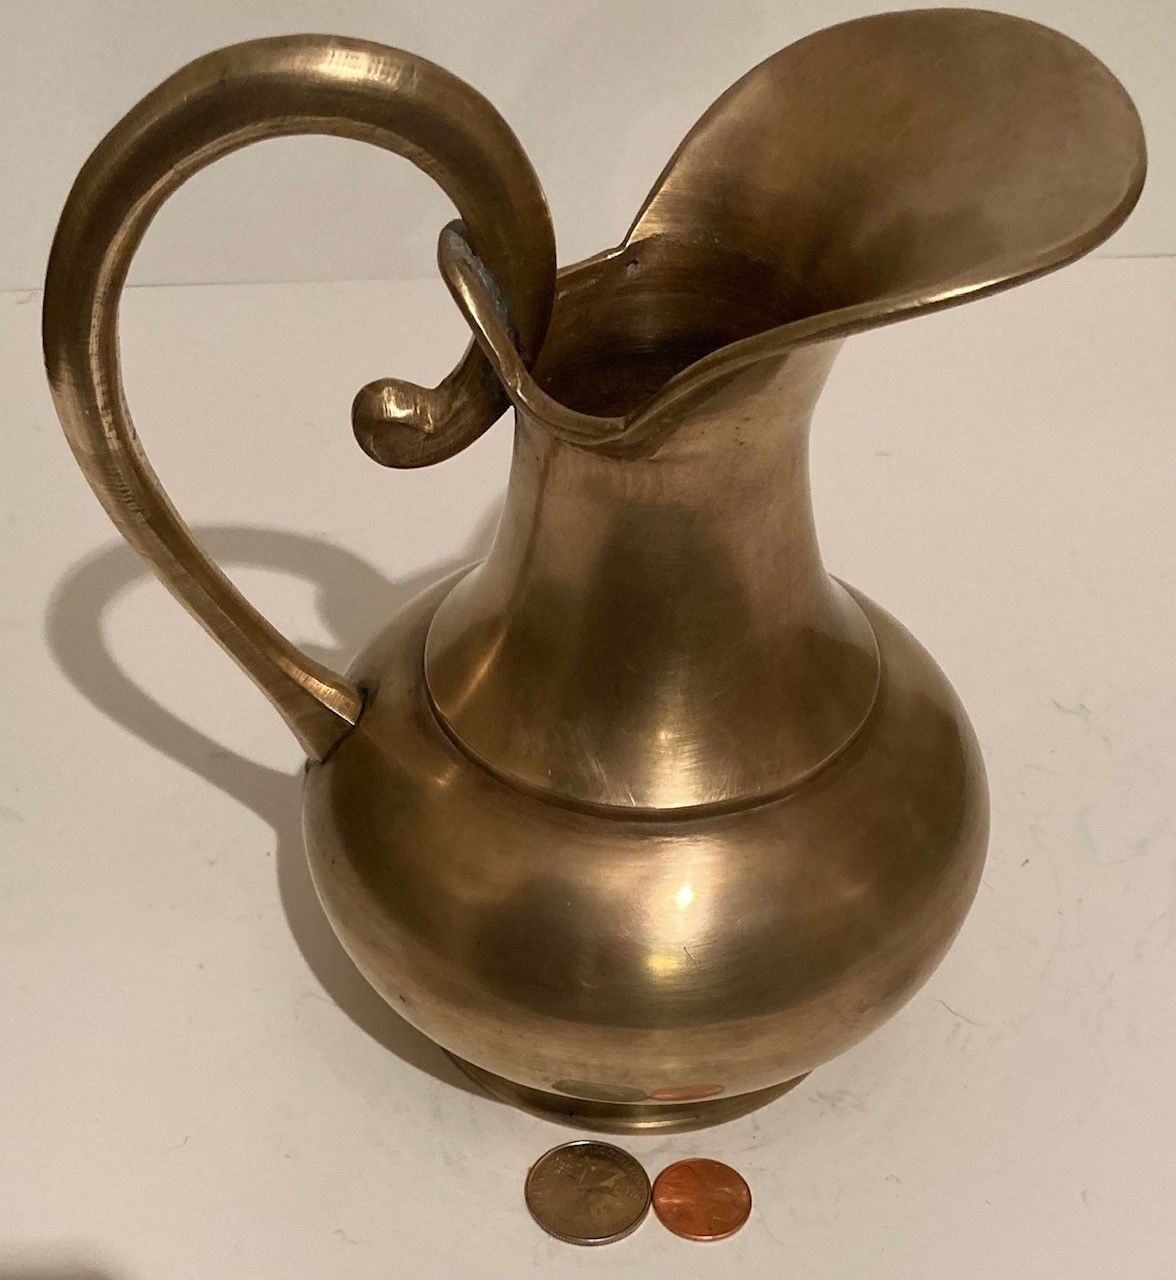 Vintage Metal Brass Serving Pitcher, 7" x 7 1/2", Quality, Heavy Duty, Kitchen Decor, Table Display, Shelf Display, This Can Be Shined Up Even More